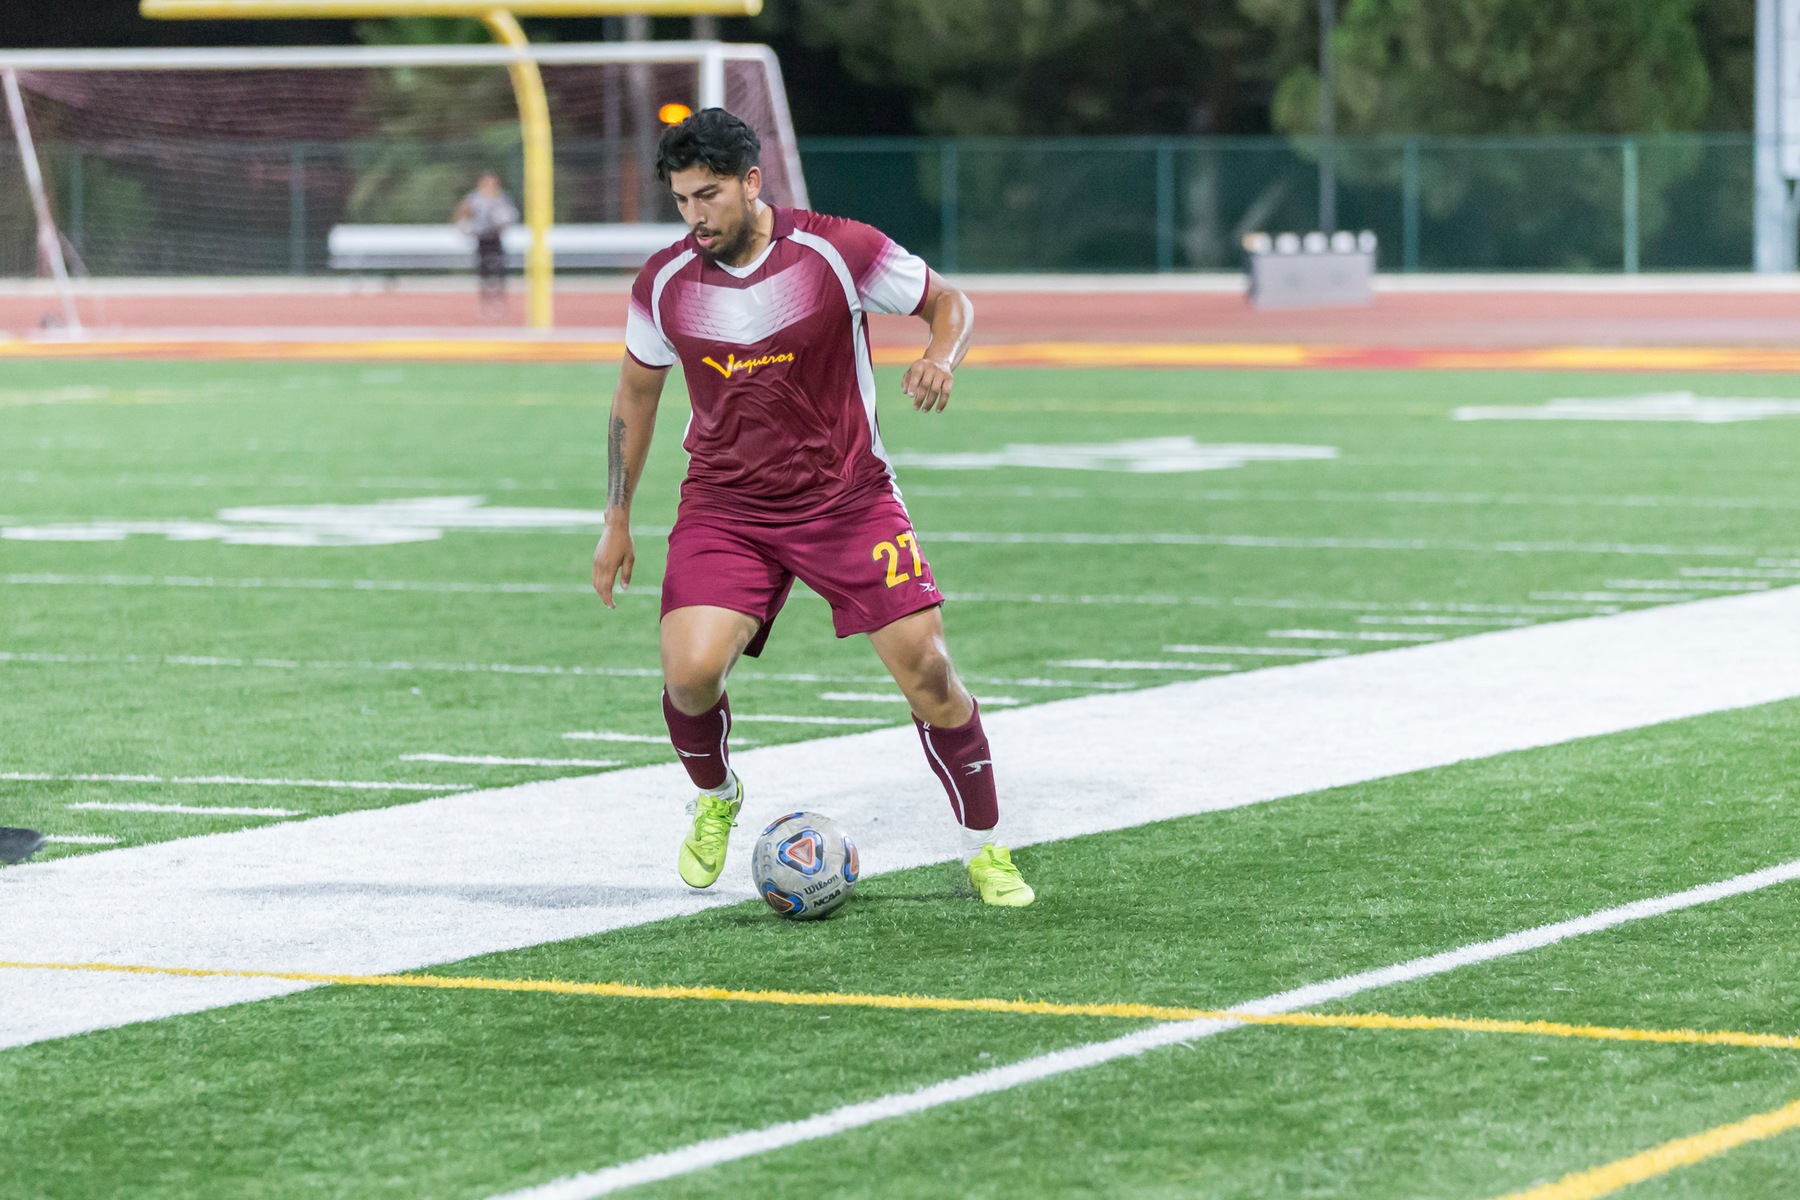 Three assists by Jafet Perez; two goals by Ricky Morales pace GCC to 3-1 win over Imperial Valley